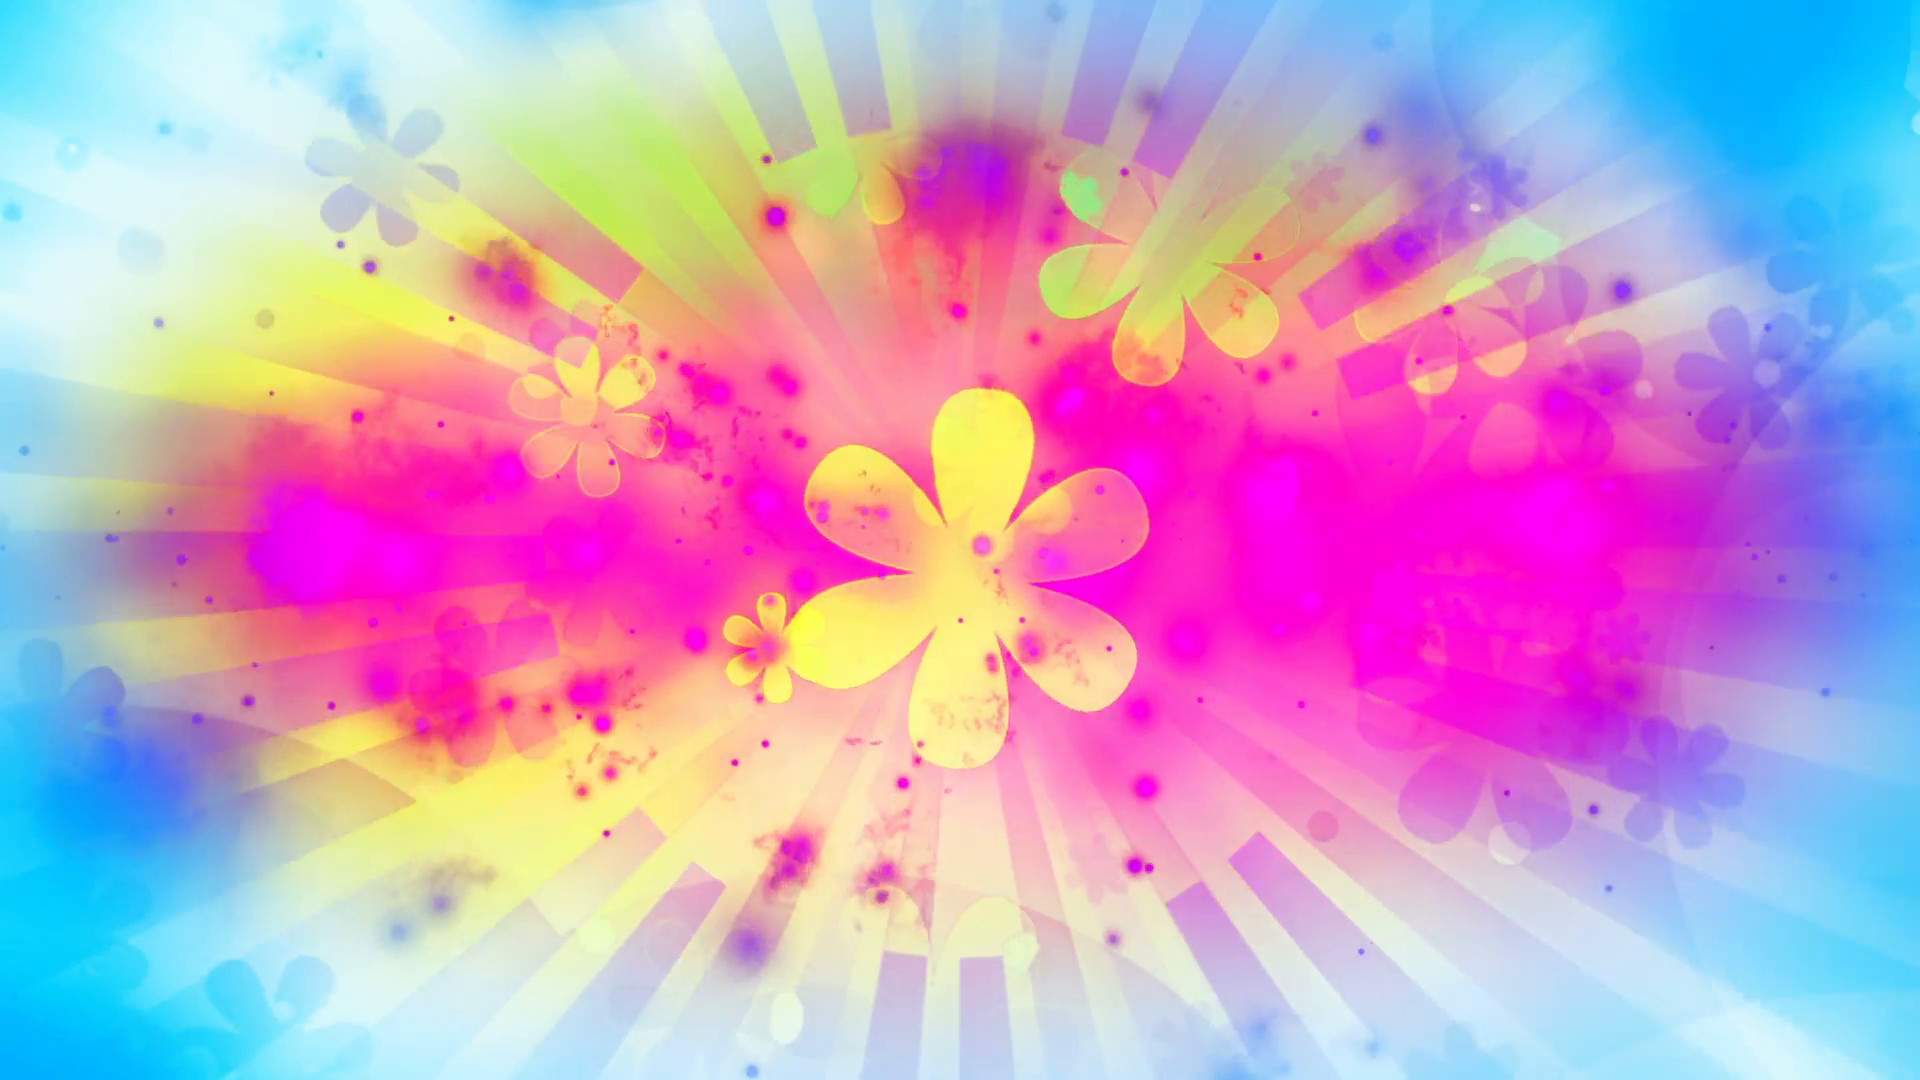 1920x1080 Backgrounds summer fun bright colors and flowers pop retro loop CG Motion  Background - VideoBlocks